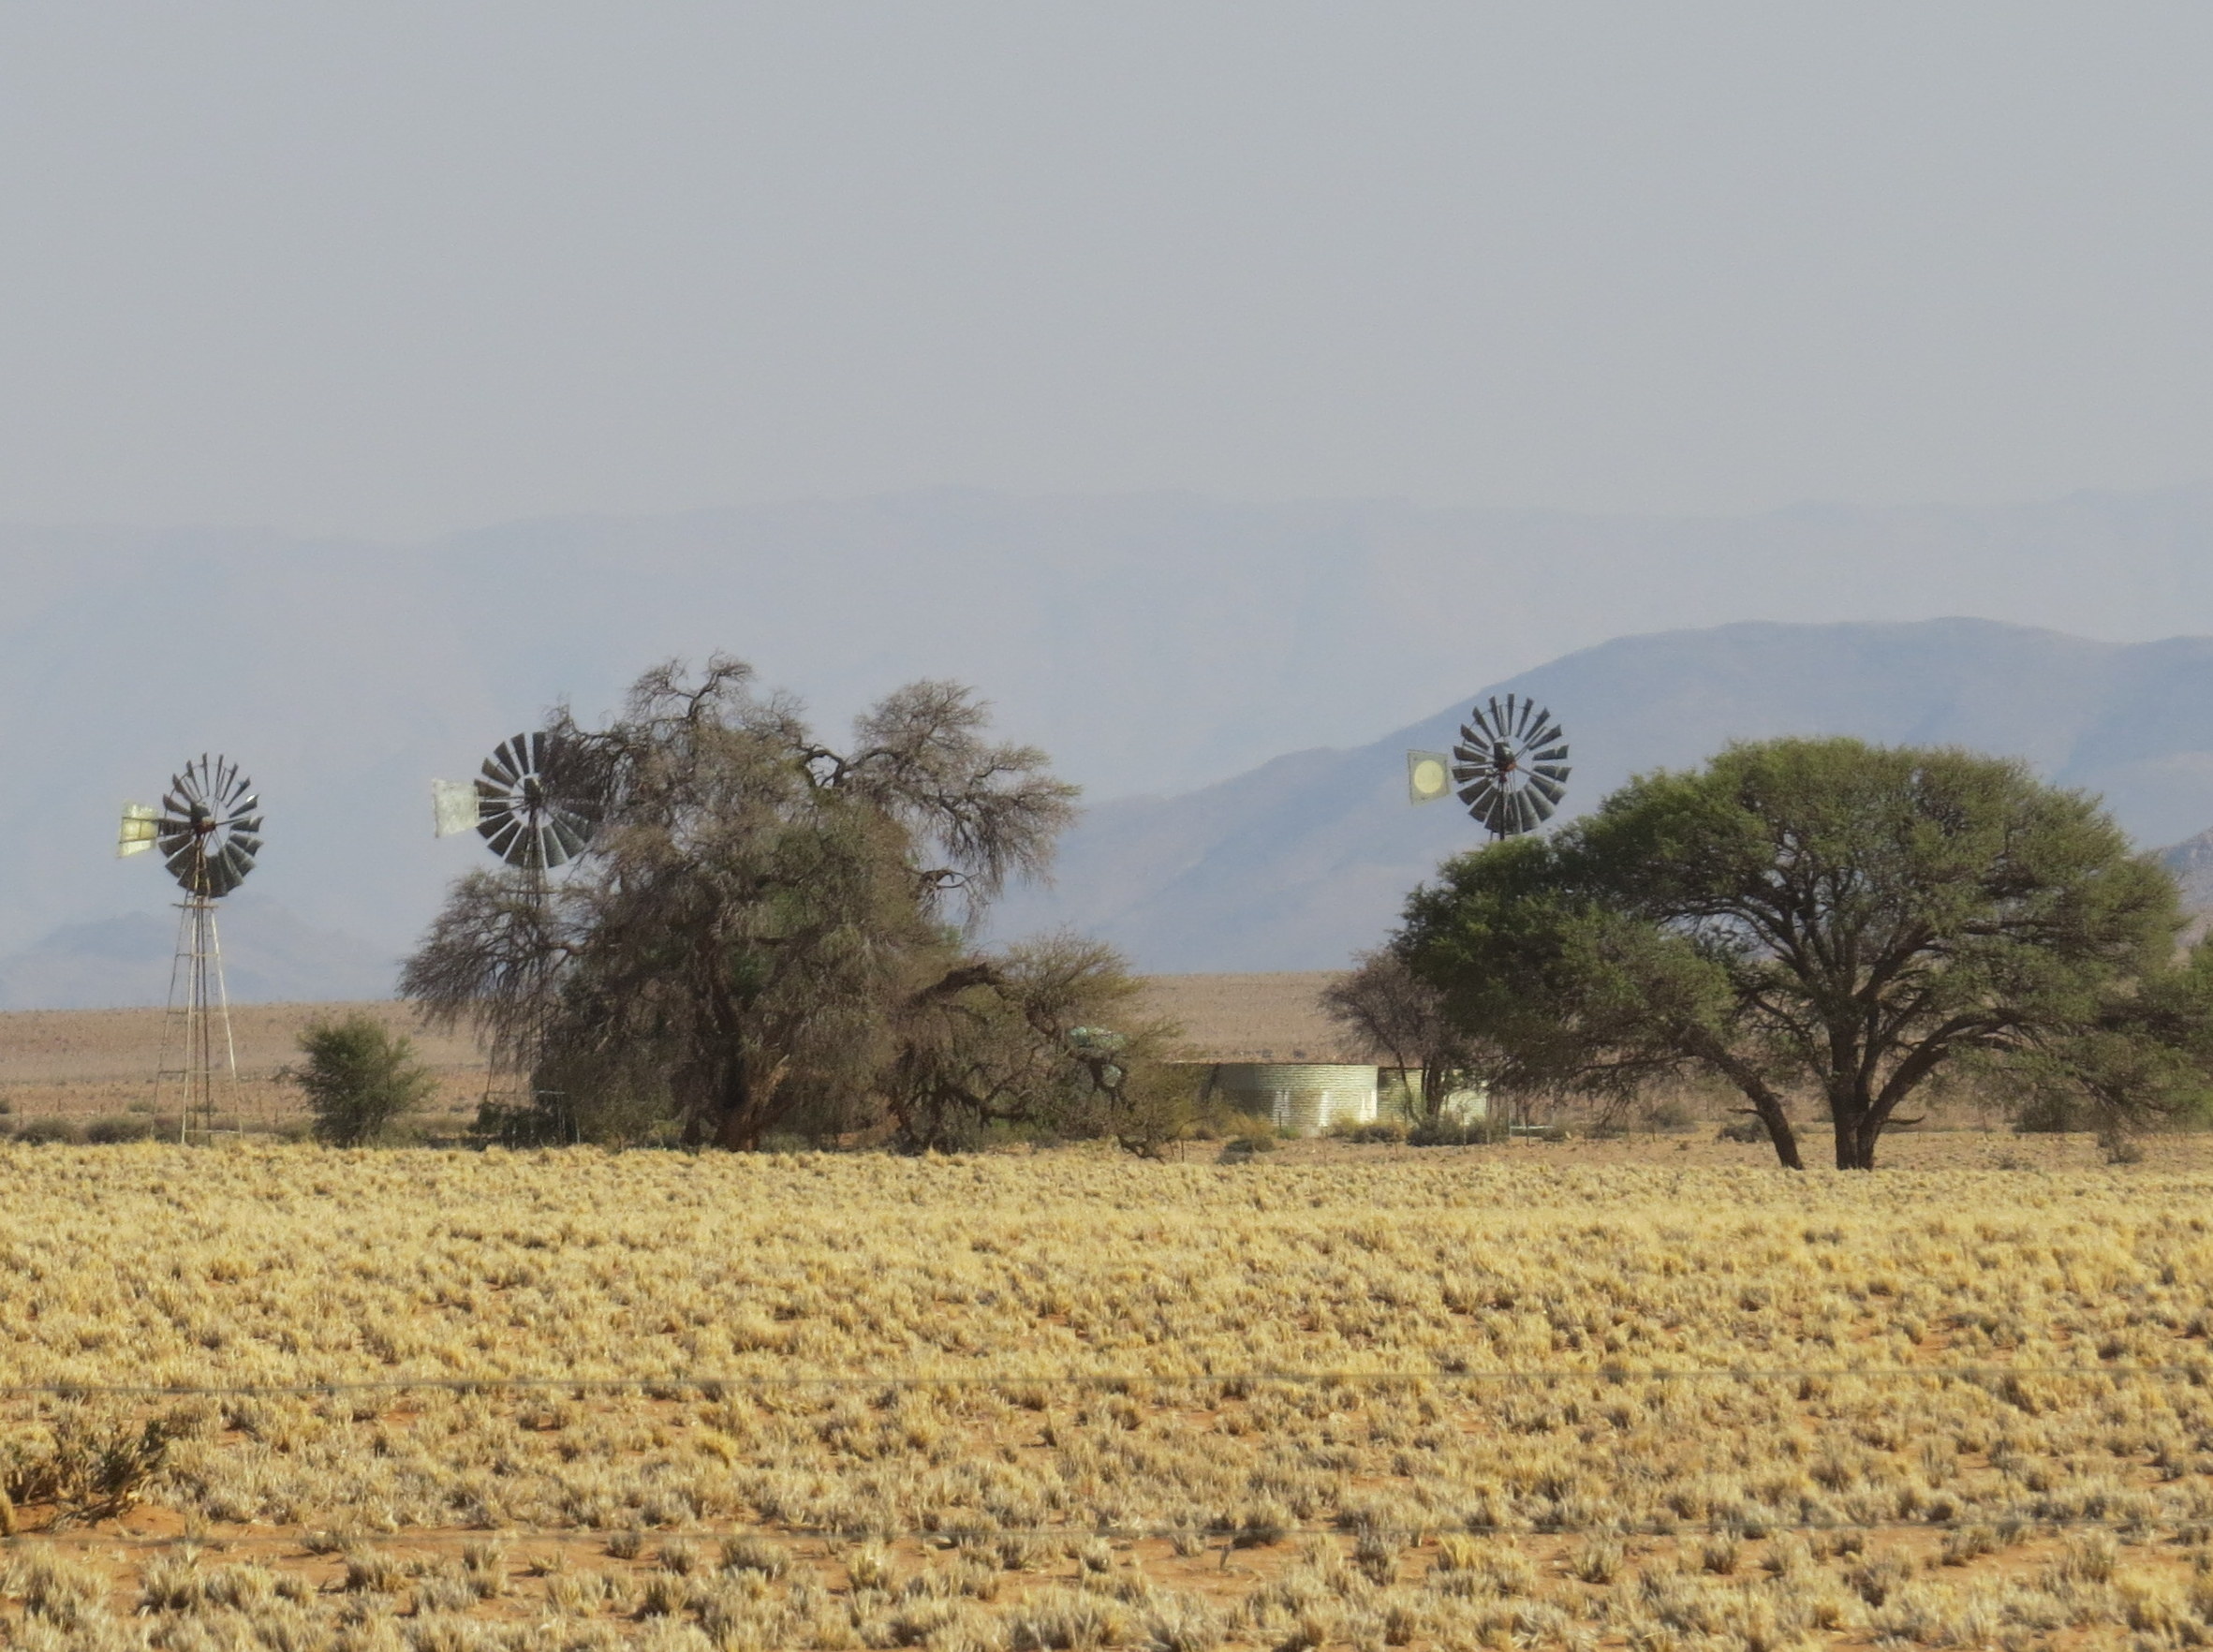 Farms dotted the arid countryside.